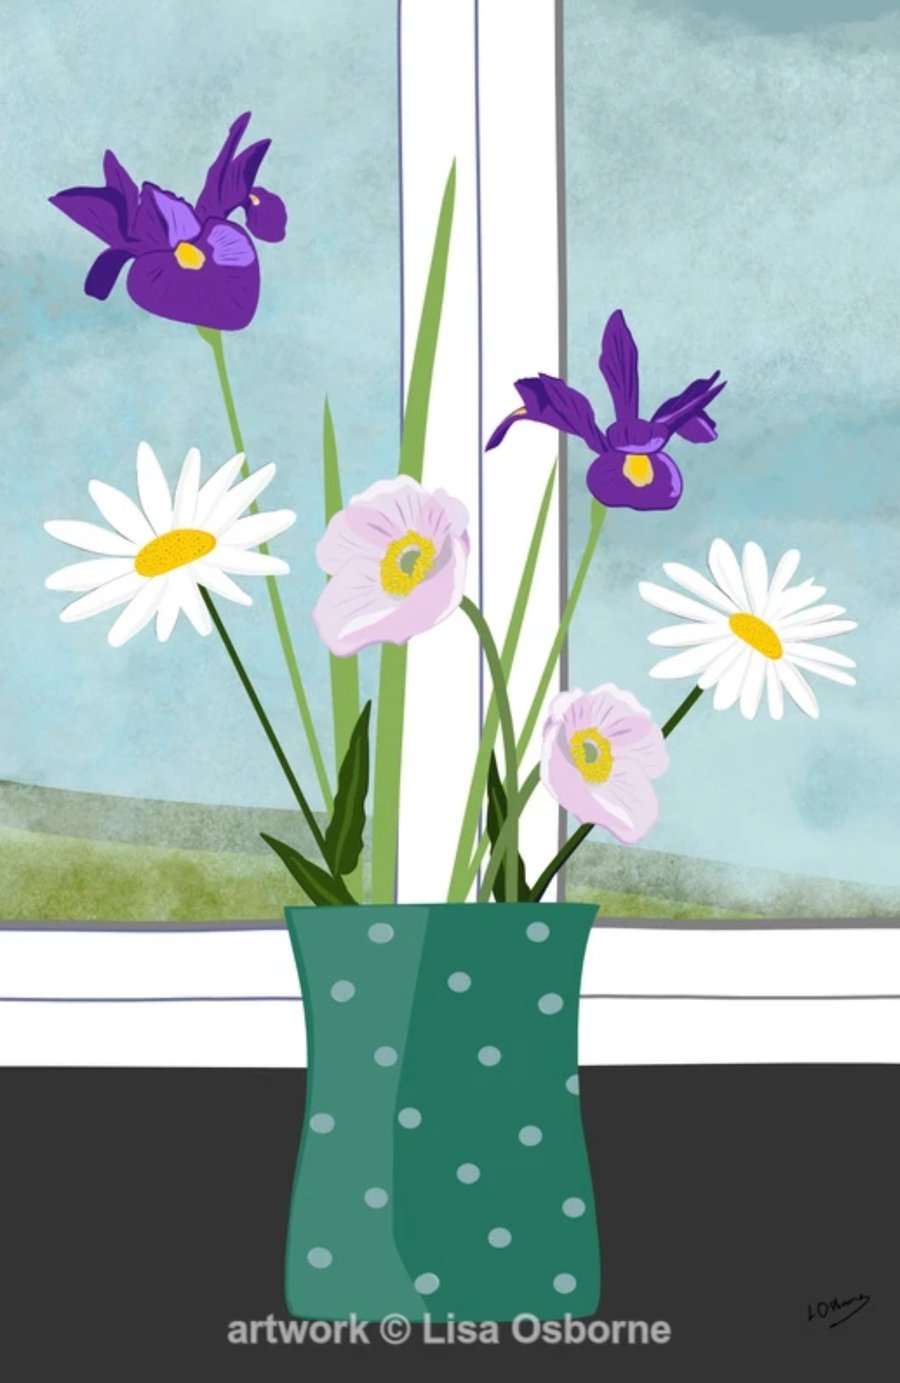 Irises and daisies - print from illustration of flowers